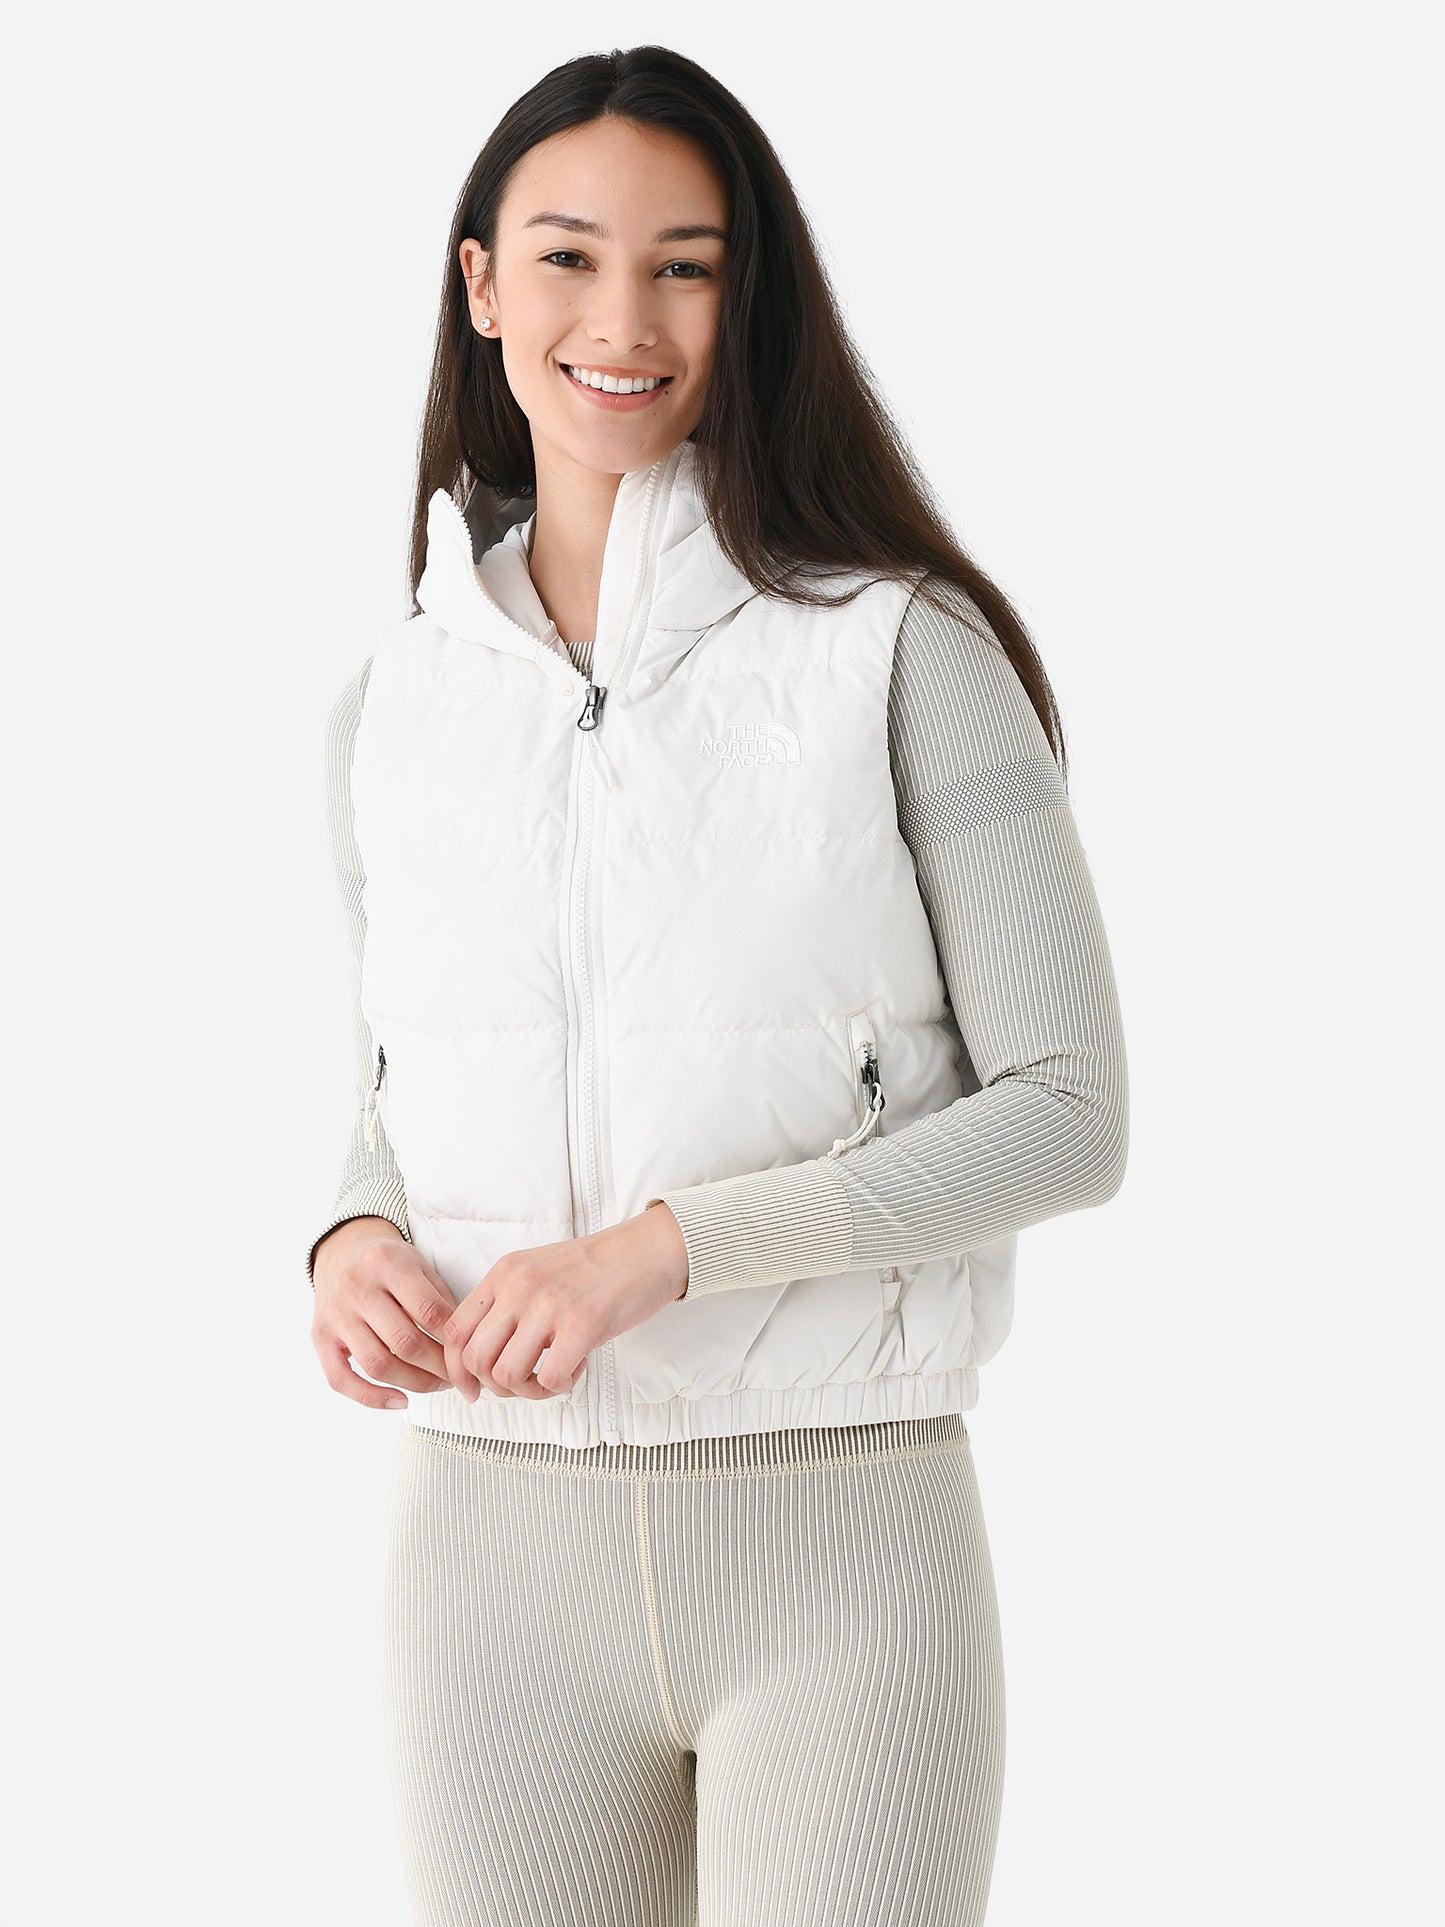 The North Face Women’s Hydrenalite™ Down Vest